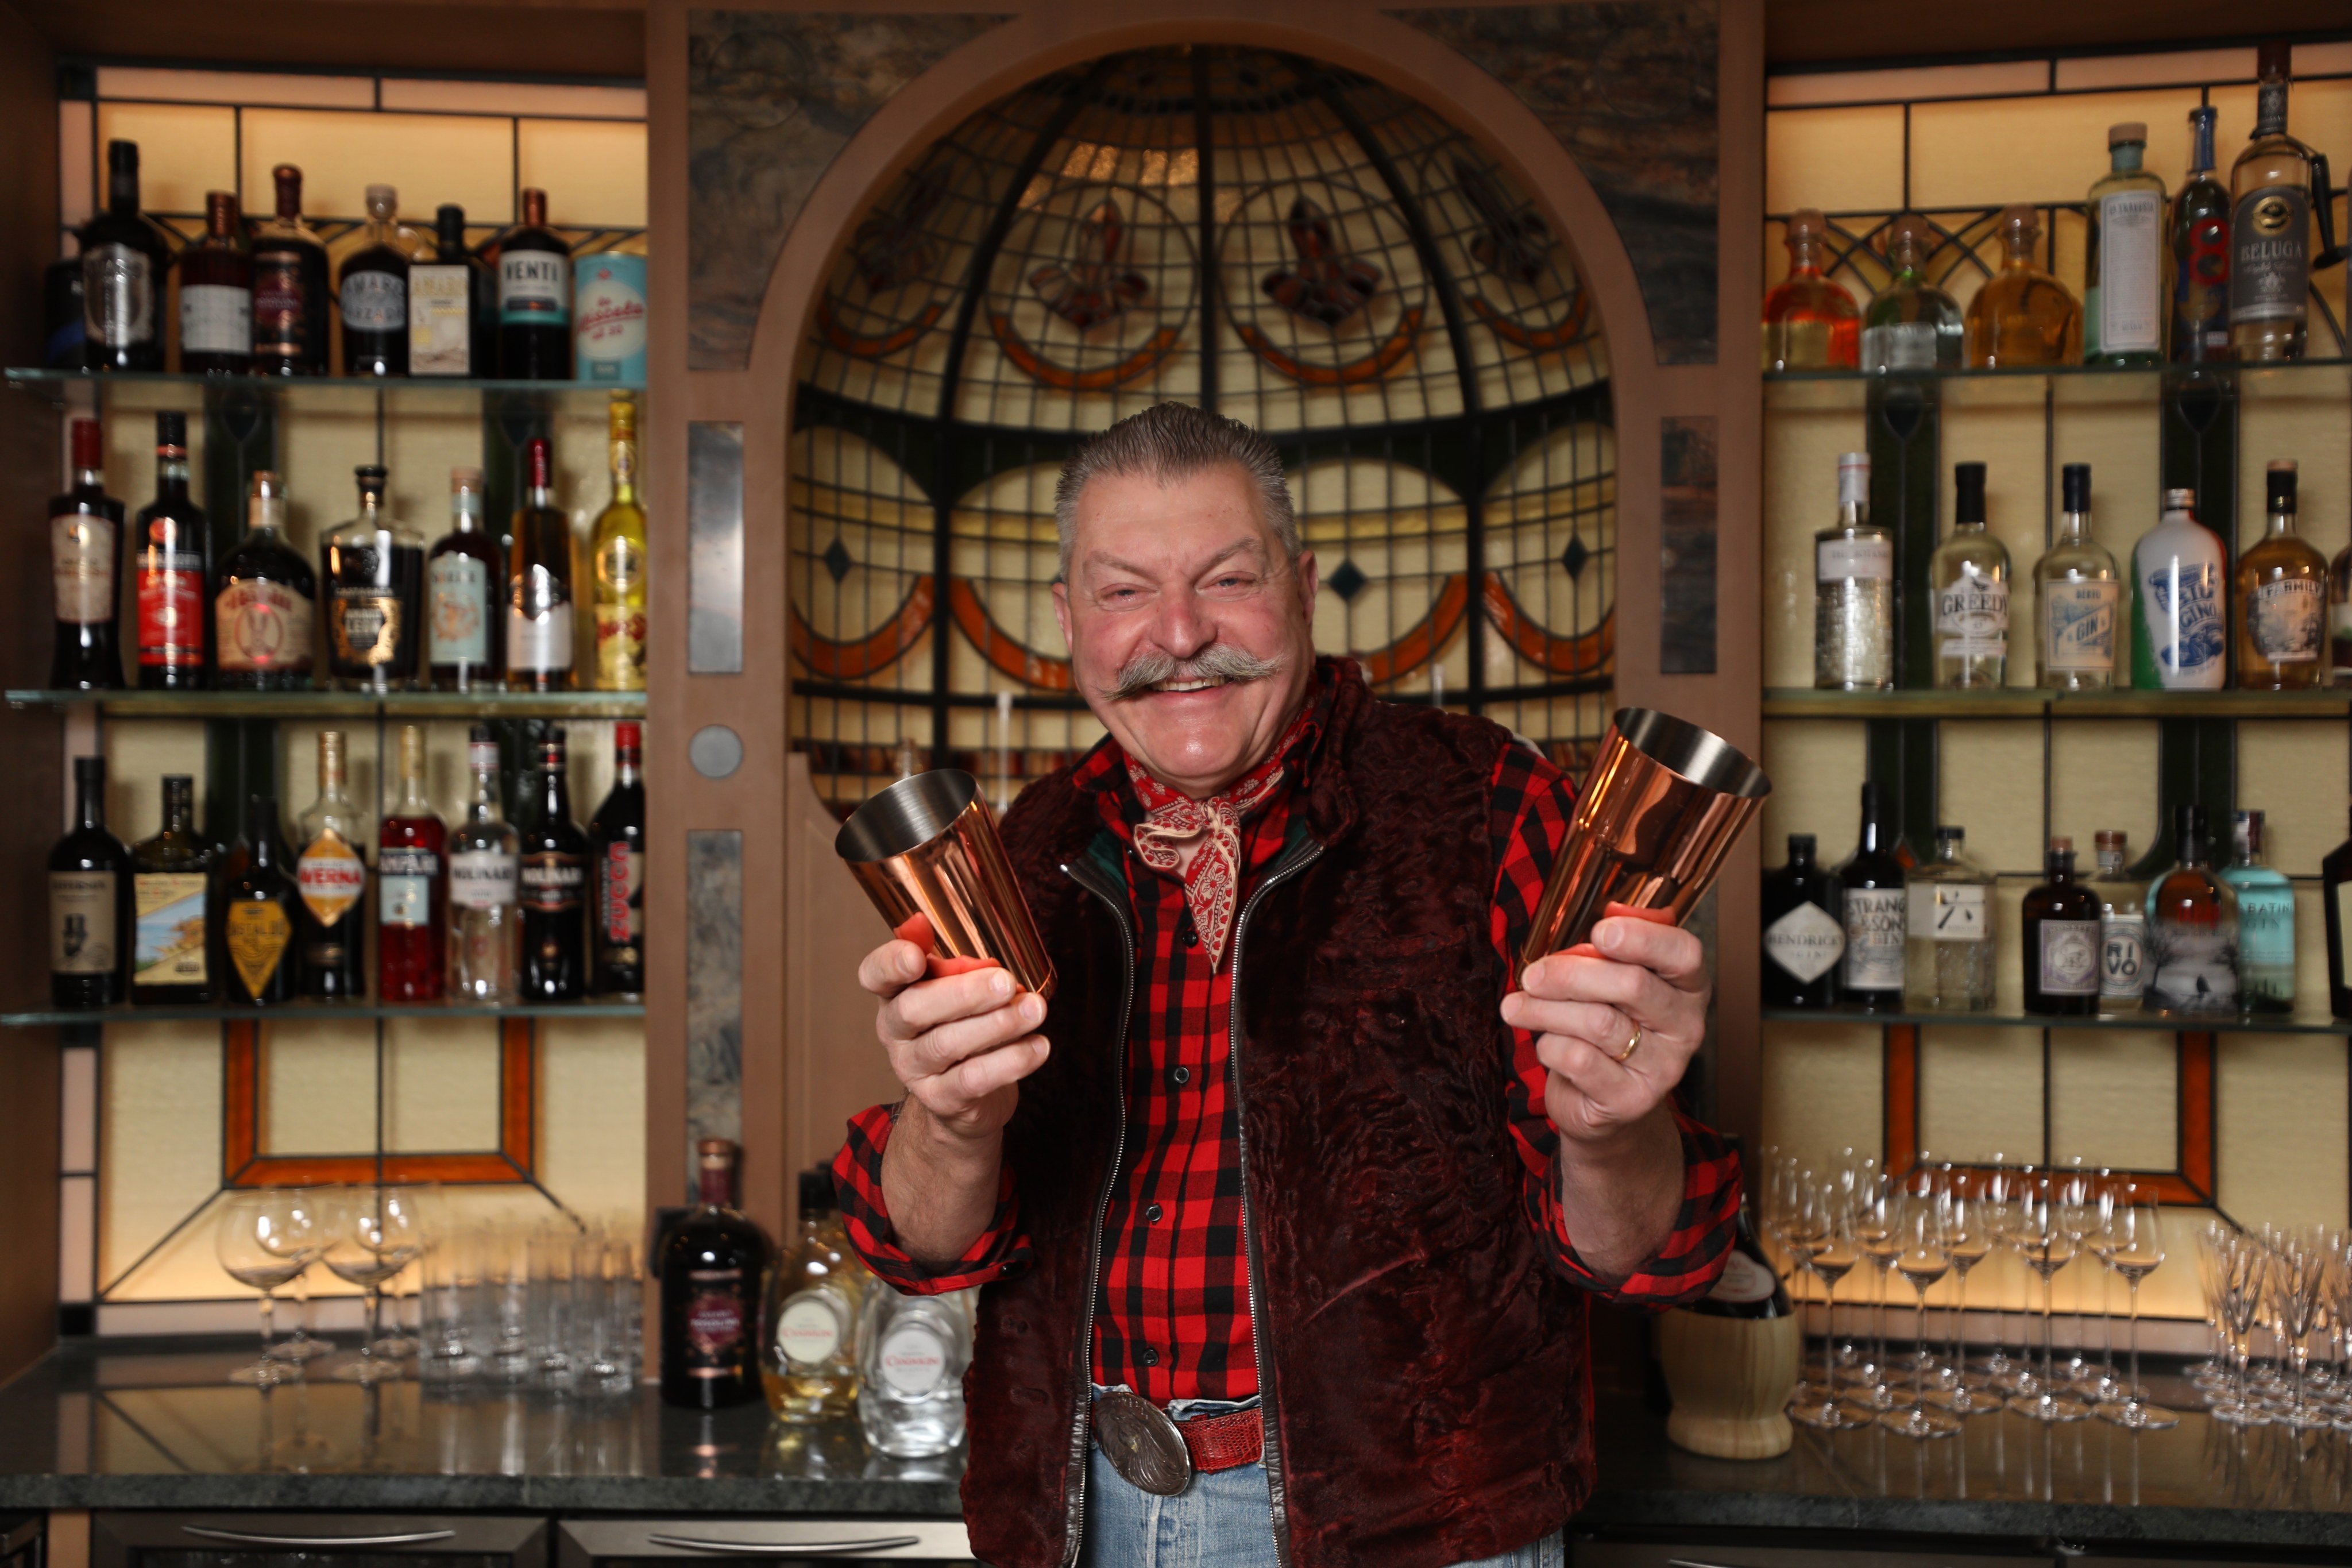 Dario Cecchini, arguably the world’s best-known butcher, is opening a restaurant, Carna by Dario Cecchini, in the new Mondrian Hong Kong hotel in Tsim Sha Tsui in Kowloon. Photo: Xiaomei Chen